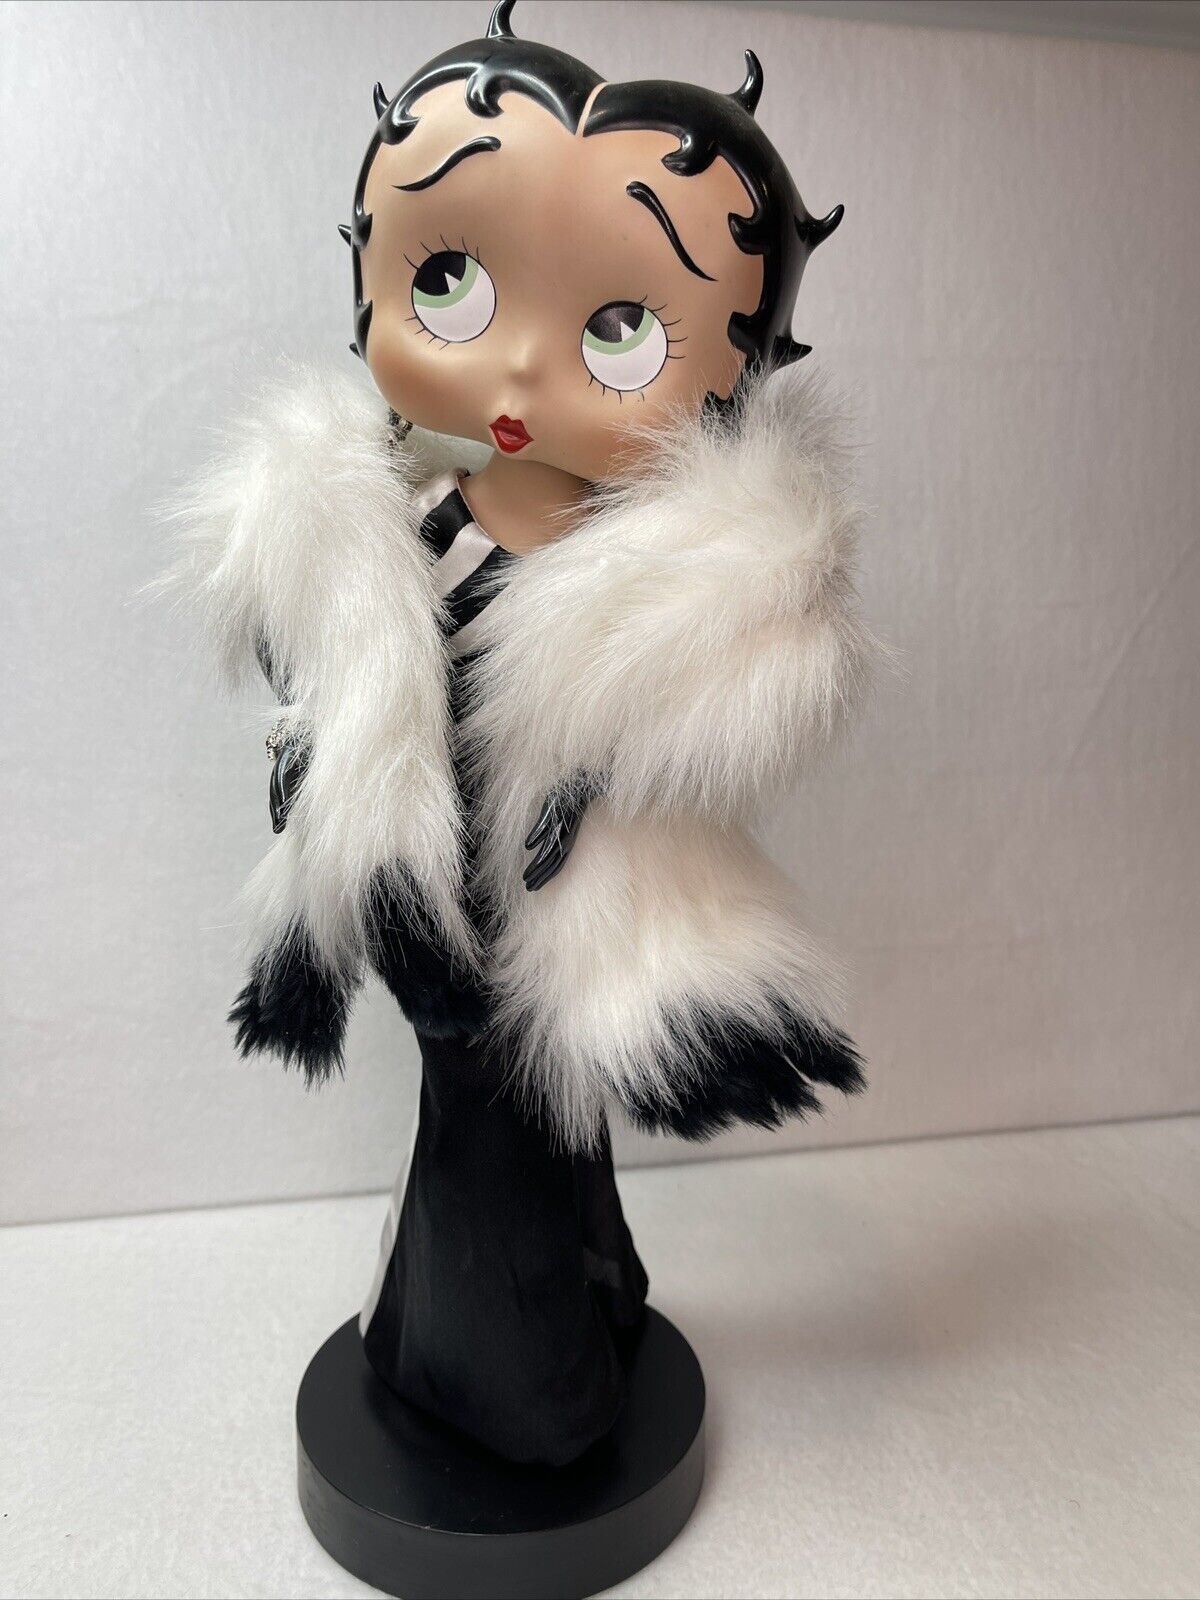 Danbury Mint Betty Boop “Dressed To Perfection” Limited Edition 2004